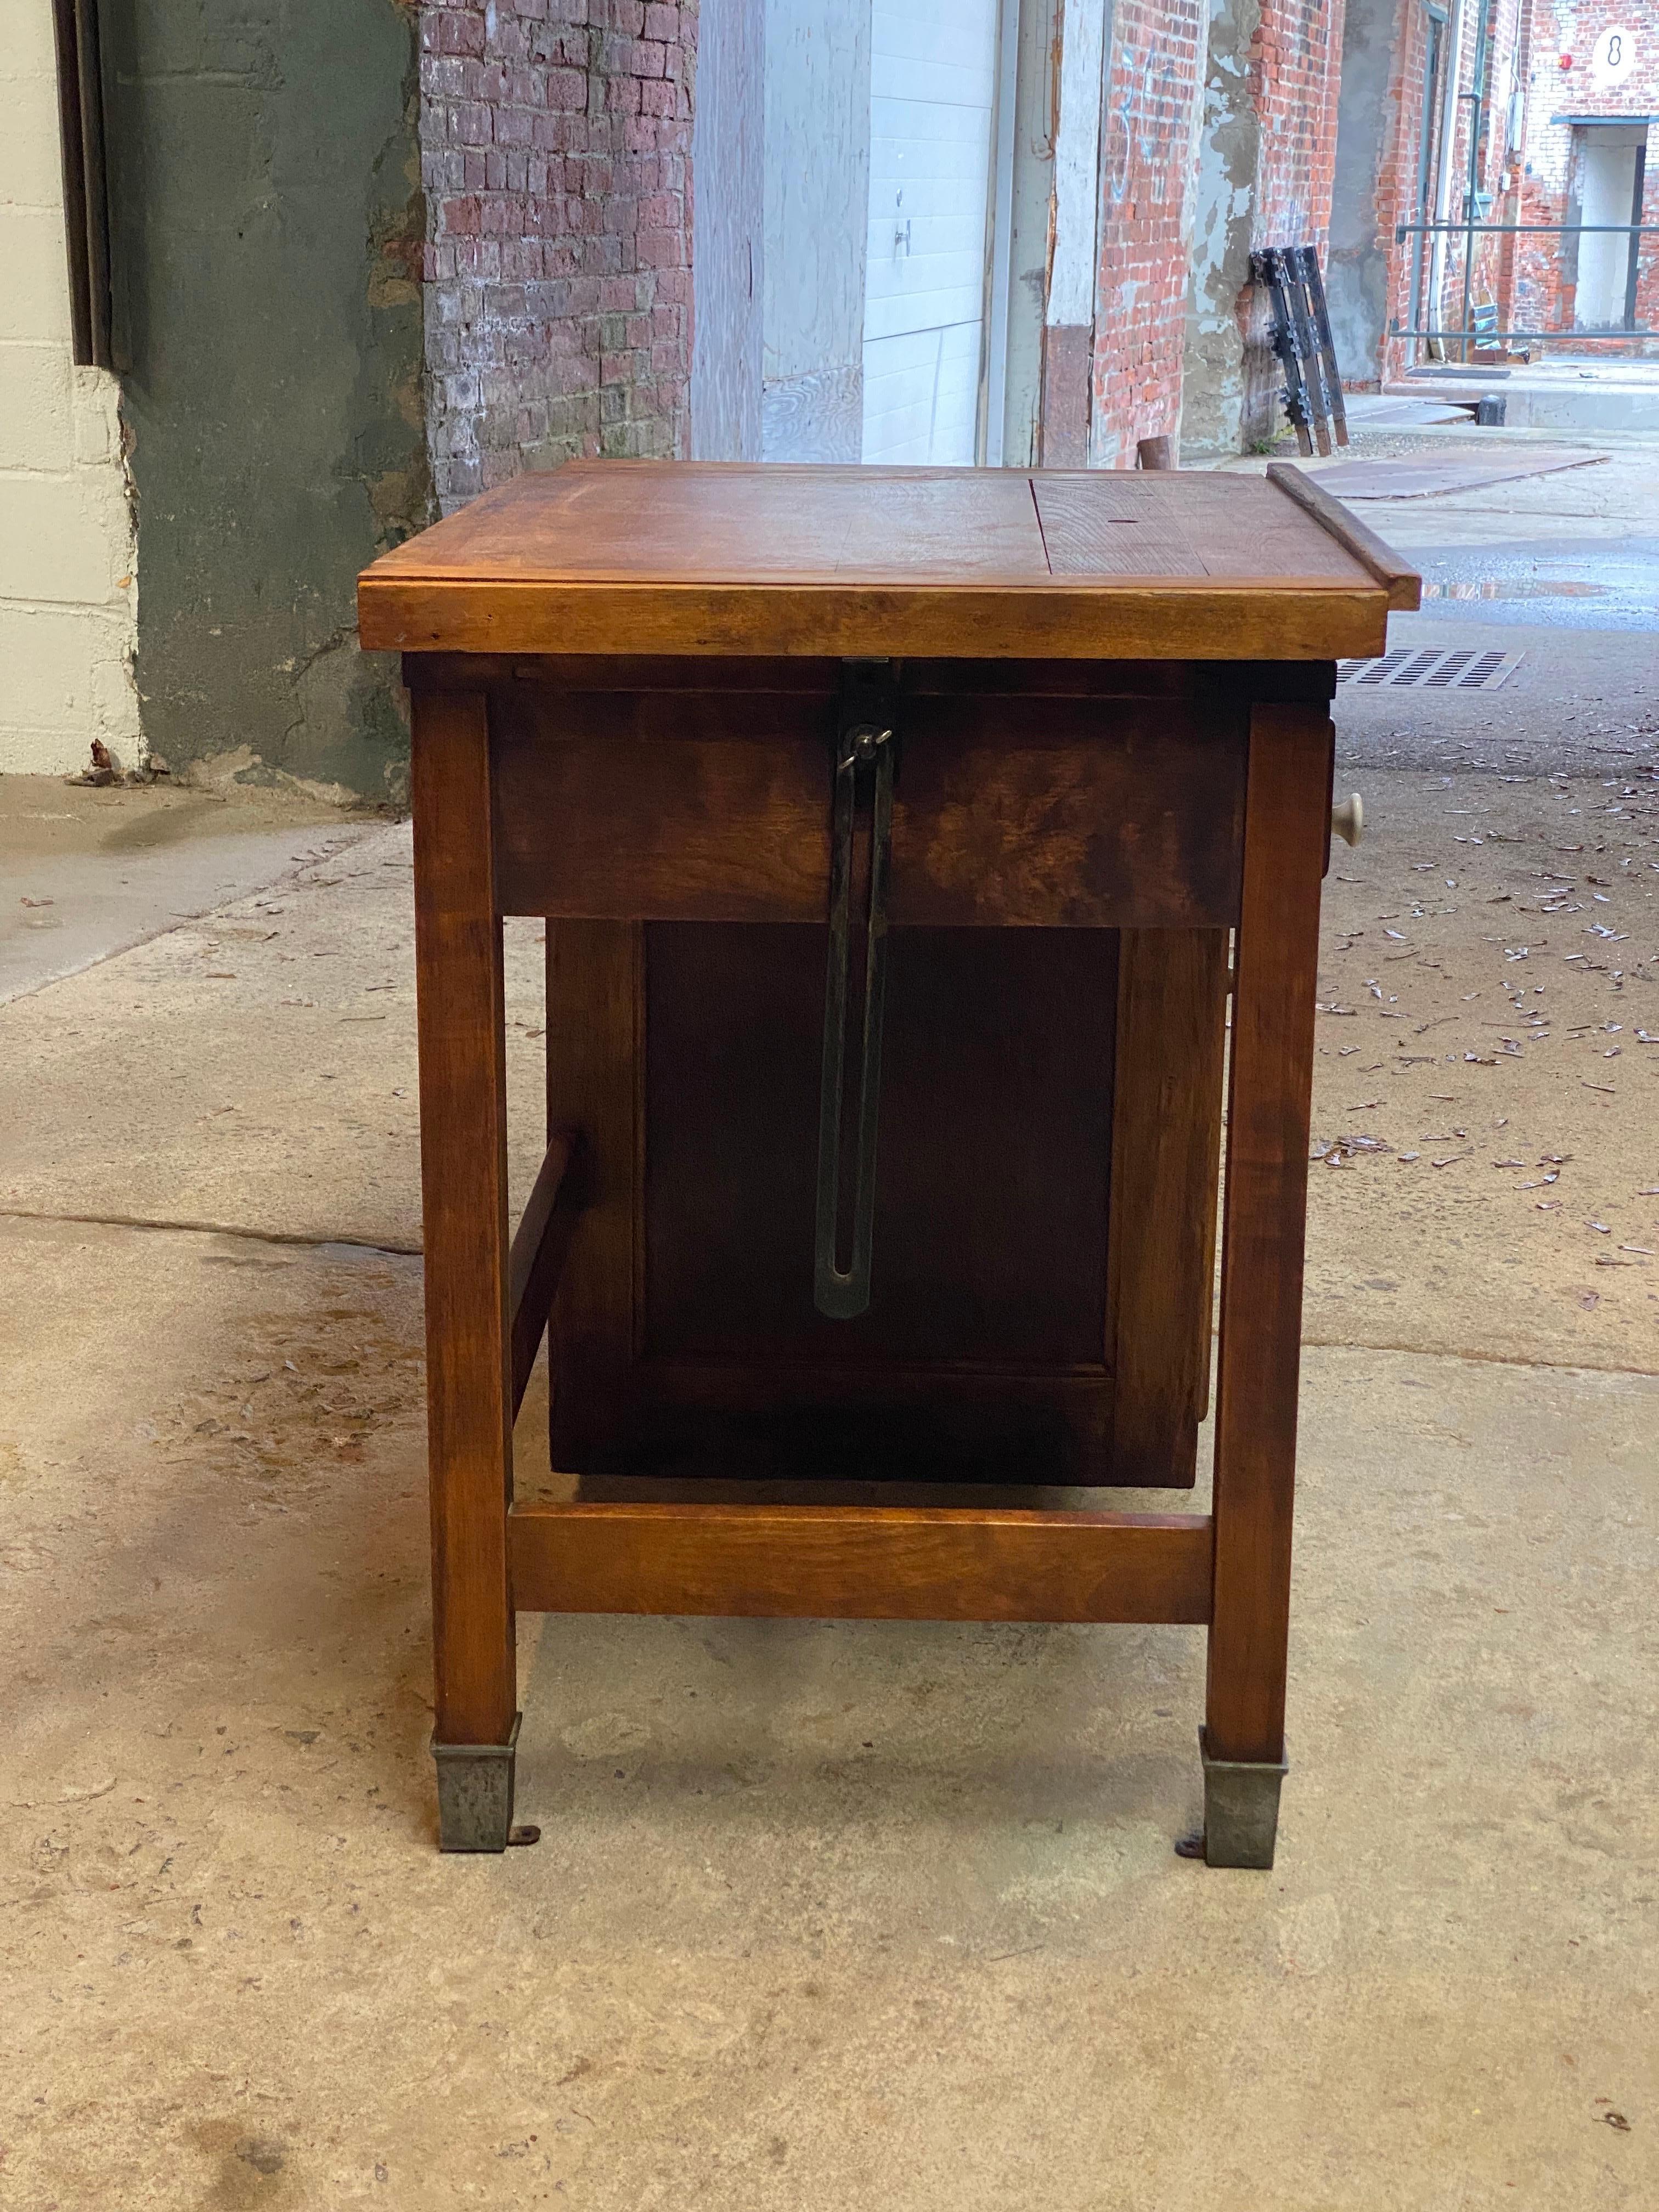 Early 20th Century 1930s Small Scale Industrial Drafting Table For Sale